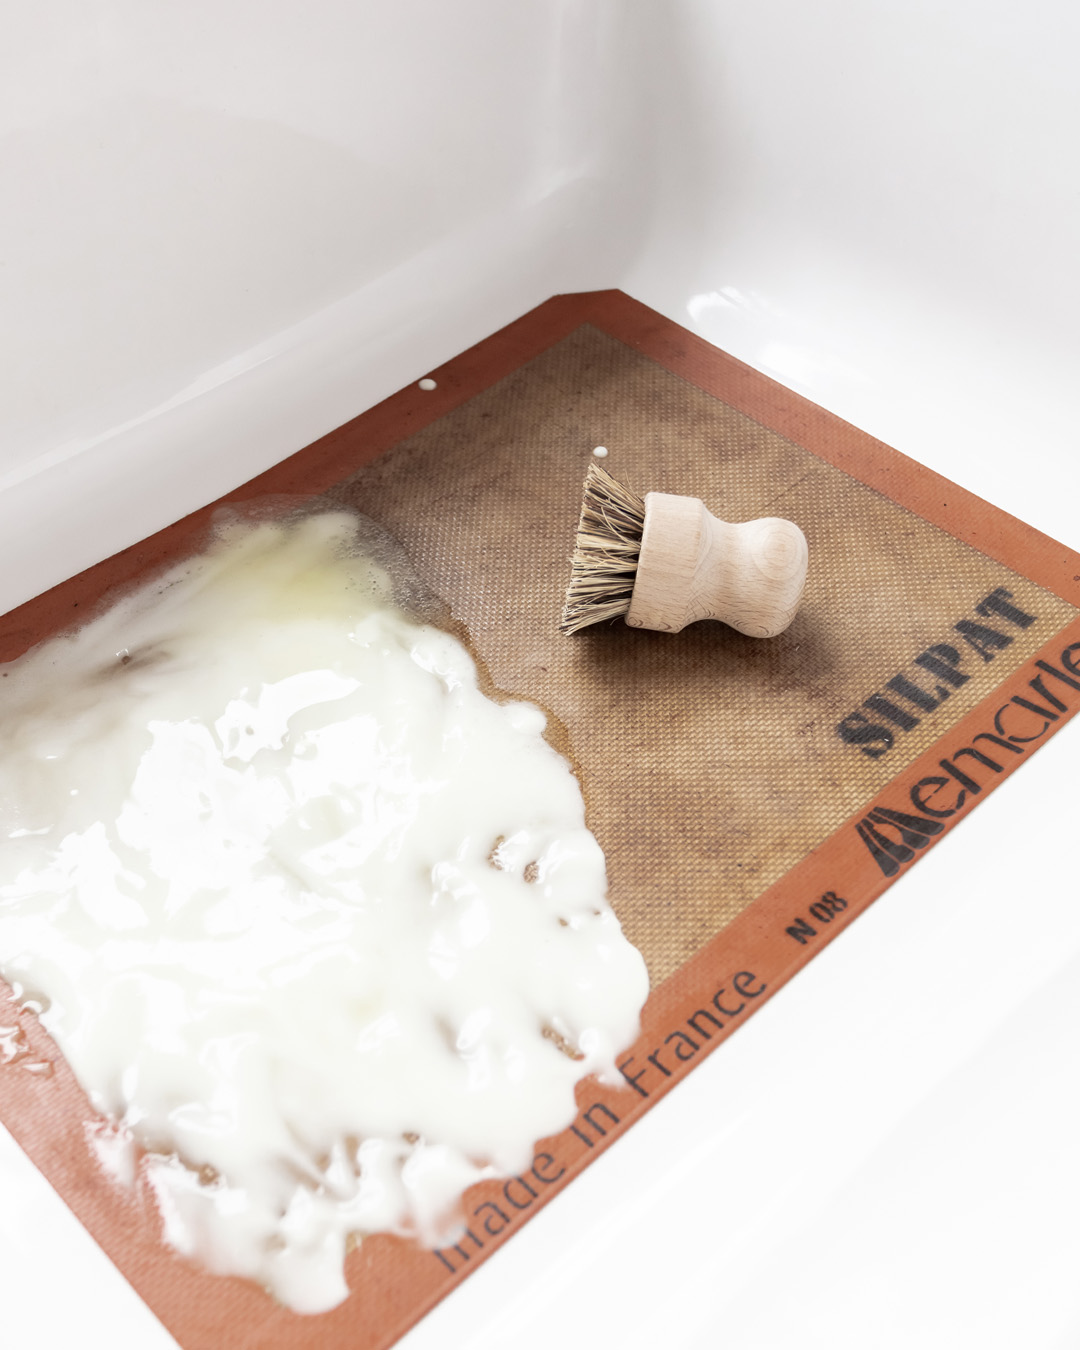 If you use your silicone baking mats often, they've probably gotten a bit stained and may even have an odour. Here's how to clean silpats easily and effectively!